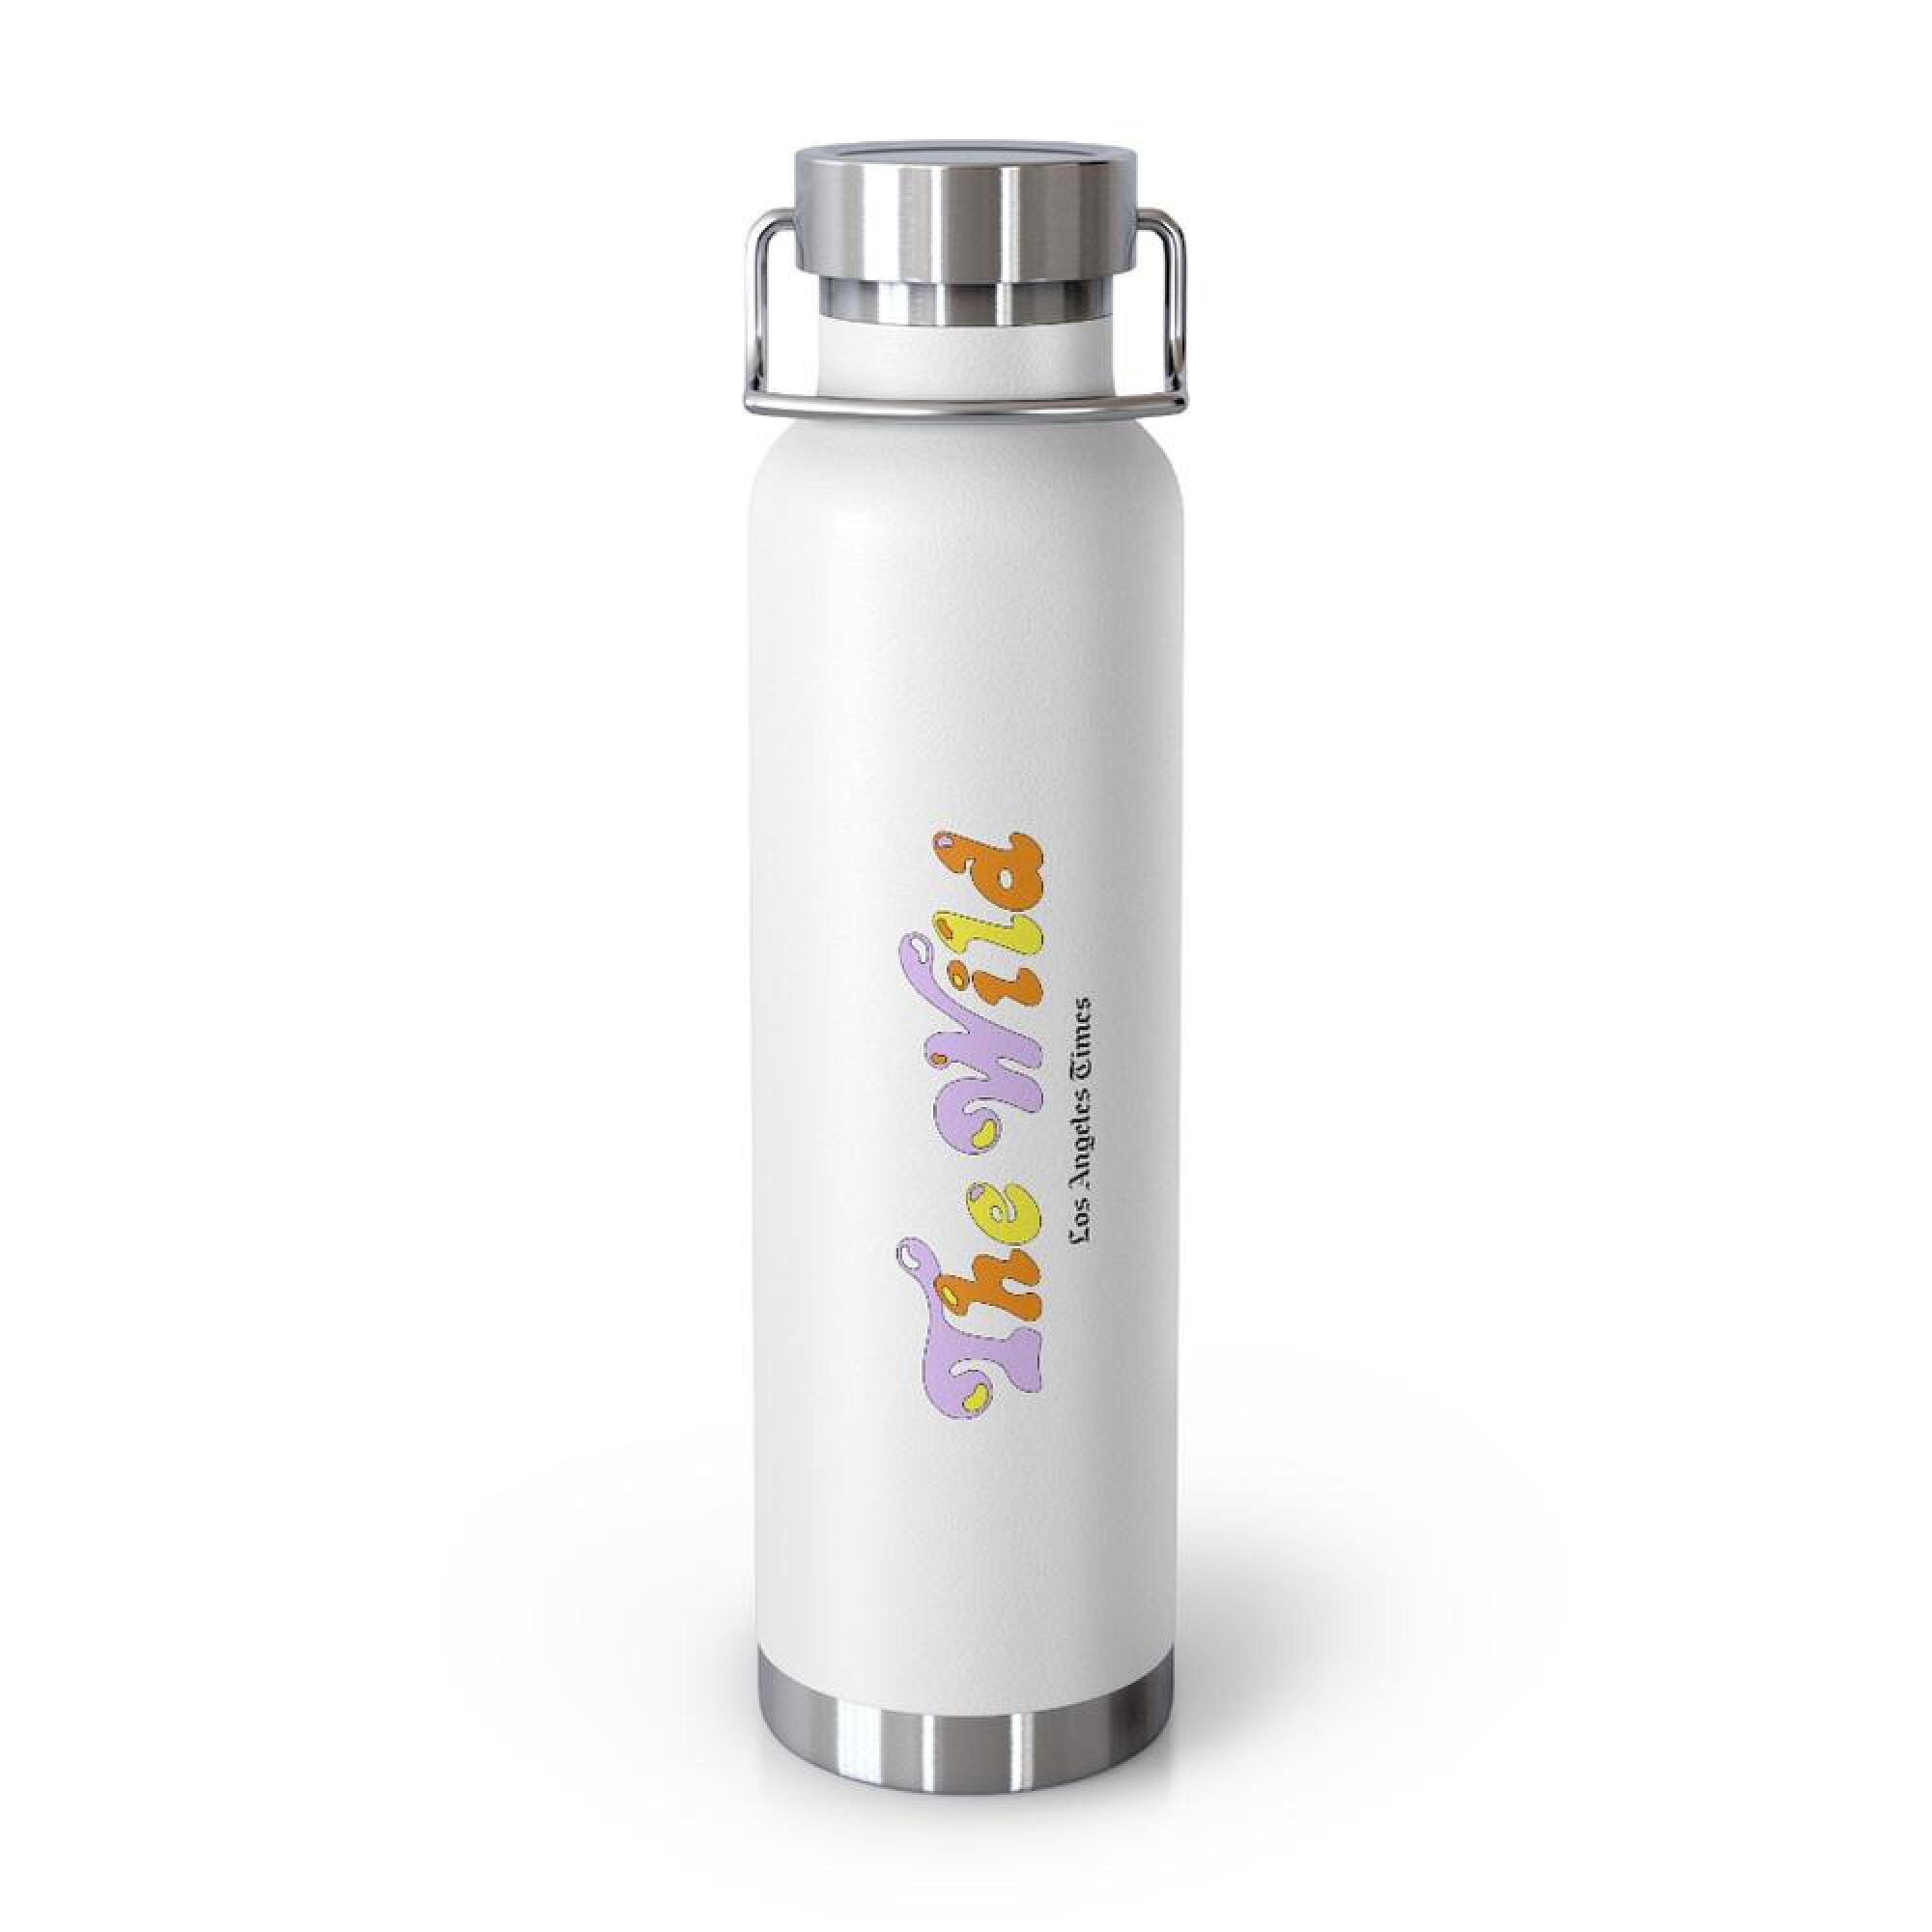 The Wild - Insulated Water Bottle, $35